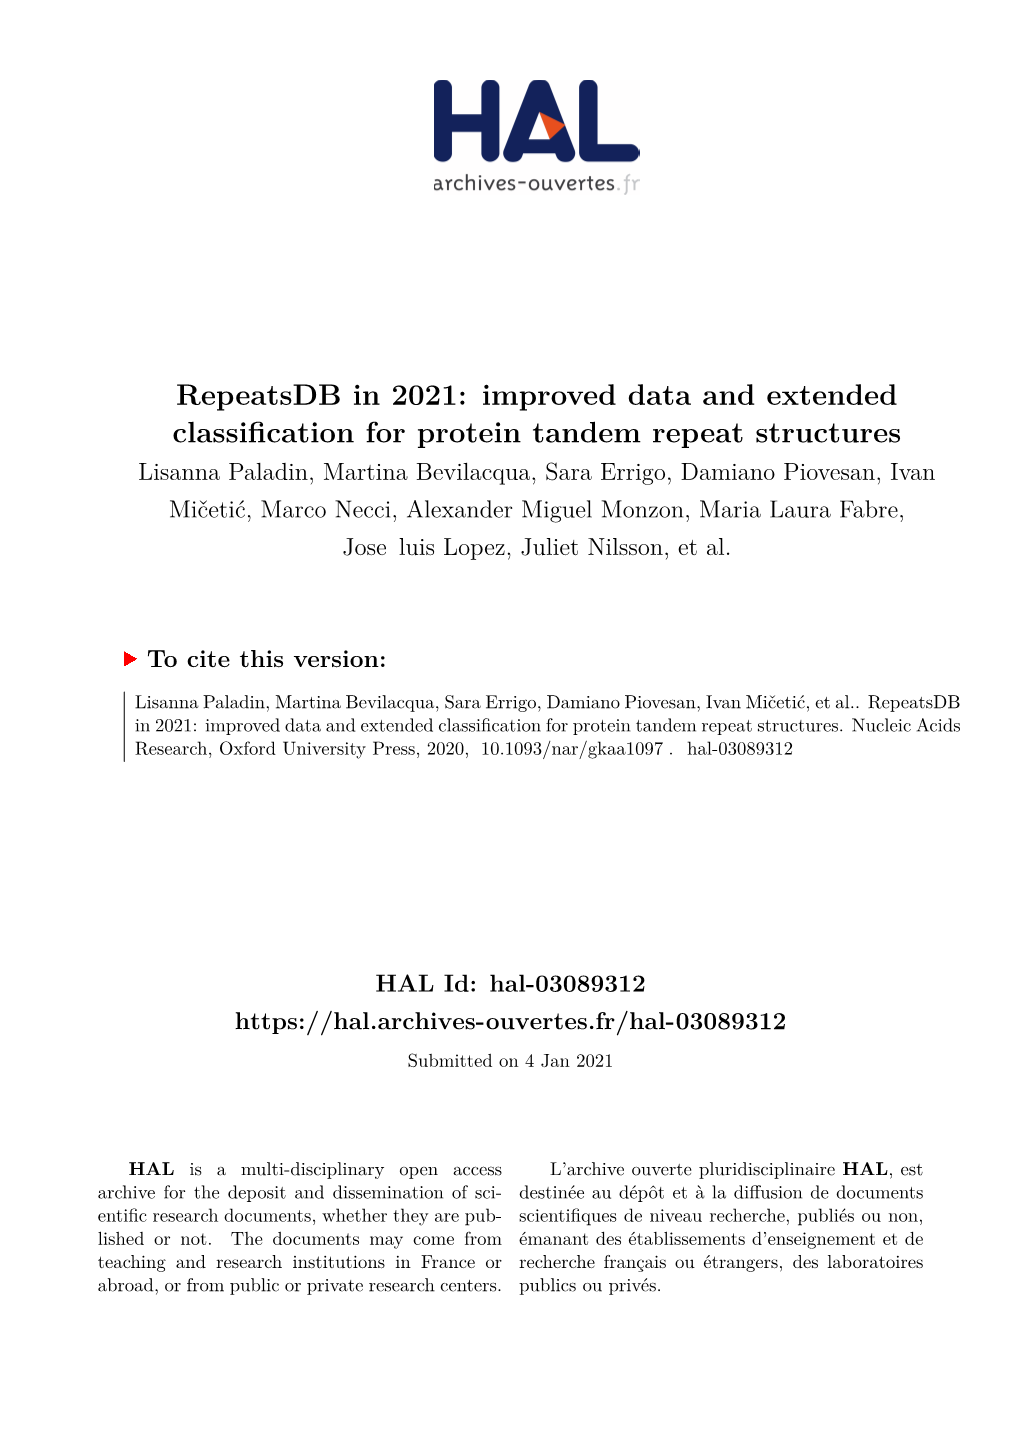 Repeatsdb in 2021: Improved Data And